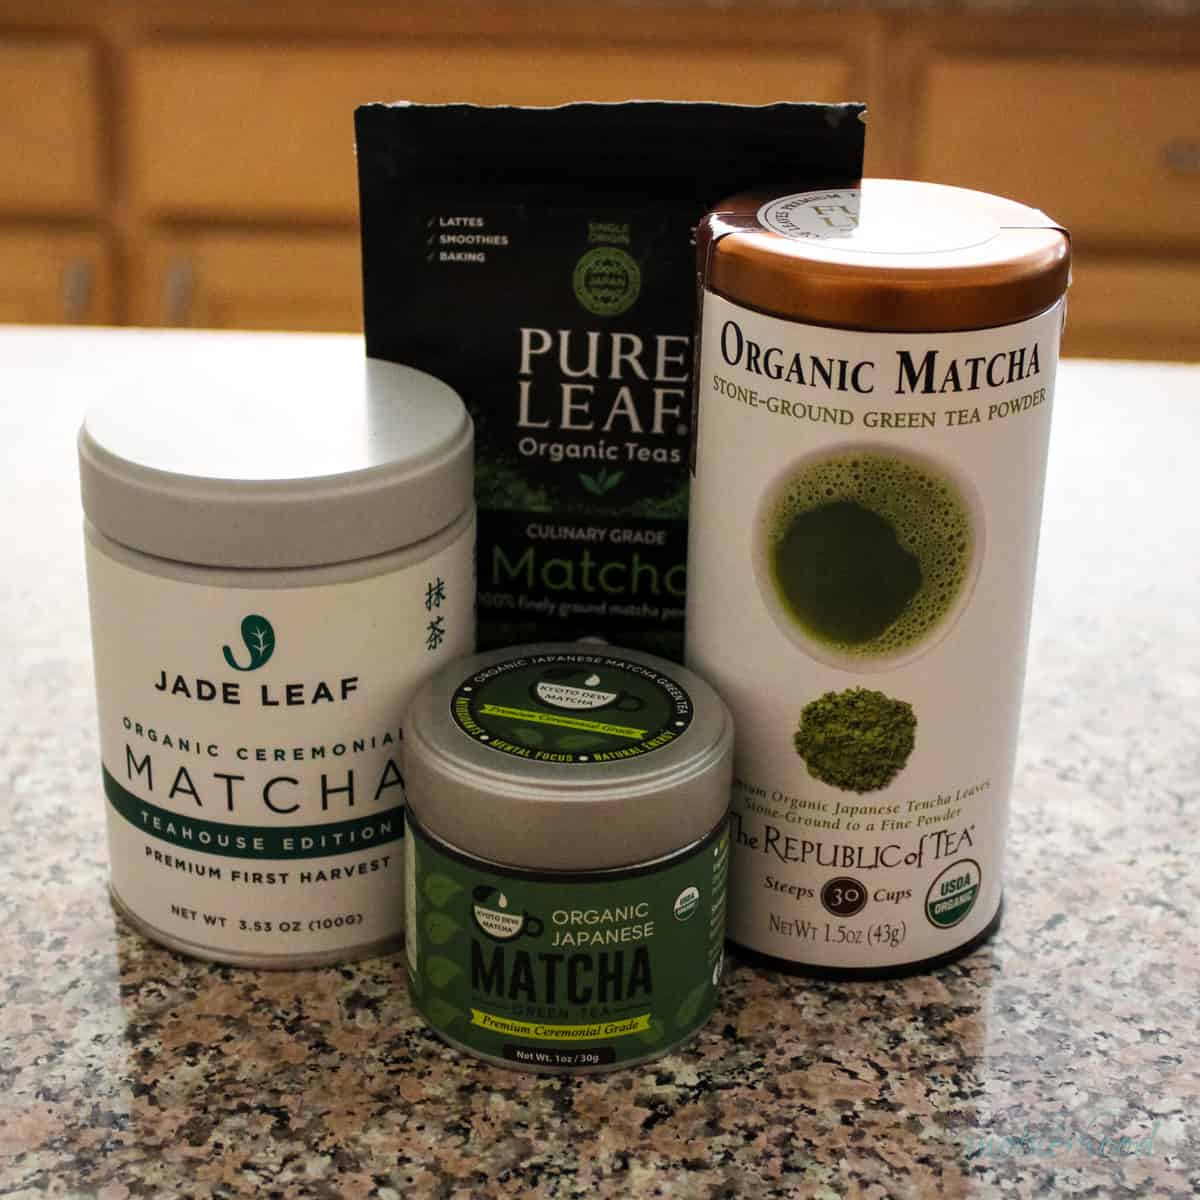 4 different brands of matcha on a counter, 2 culinary and 2 ceremonial